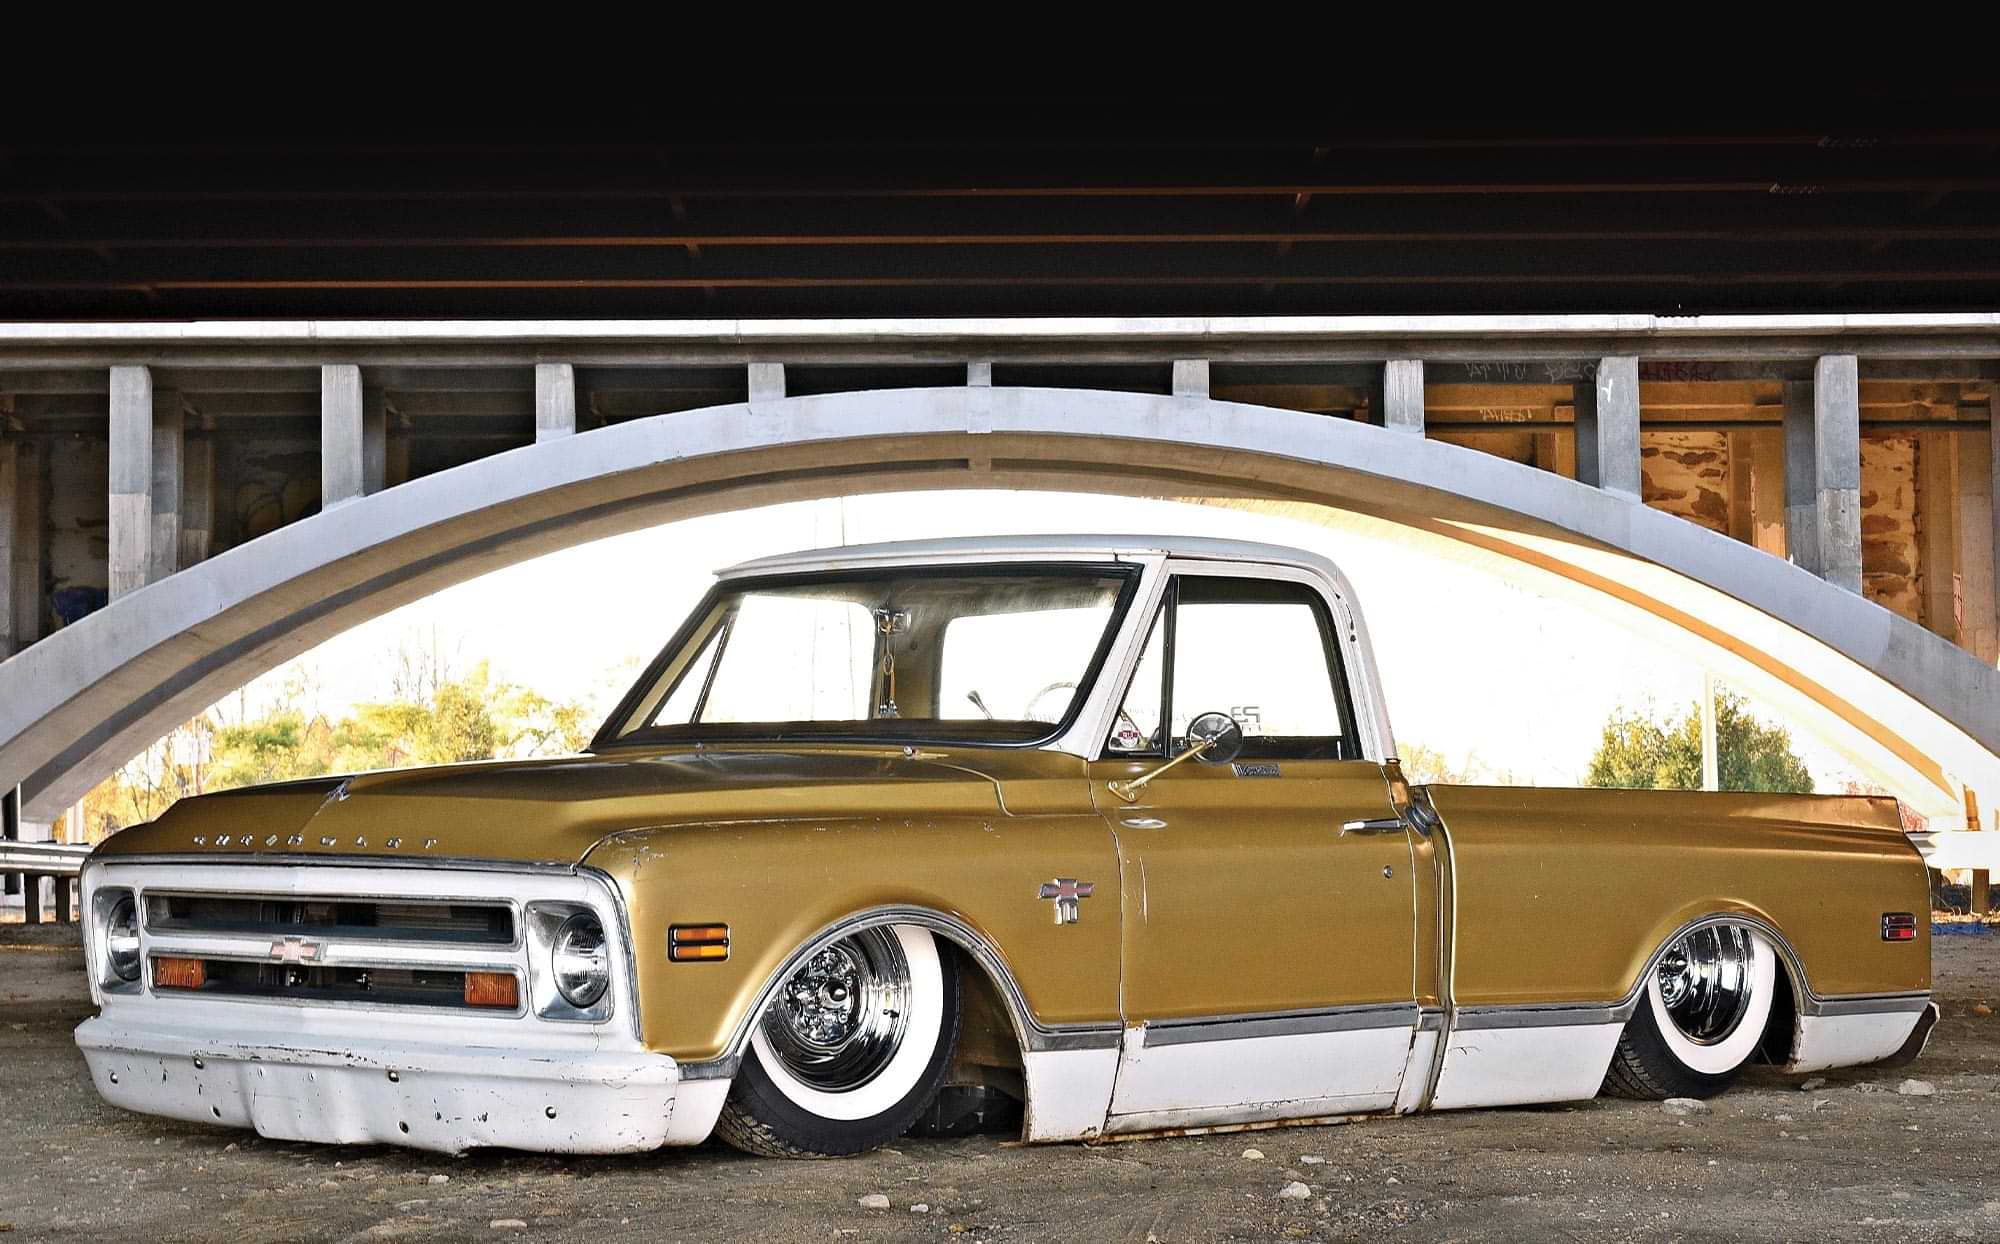 three quarter view of Phill Cann's Lo-Fi-Styled '68 C10 shortbed truck in gold and ivory, parked near an arching overpass